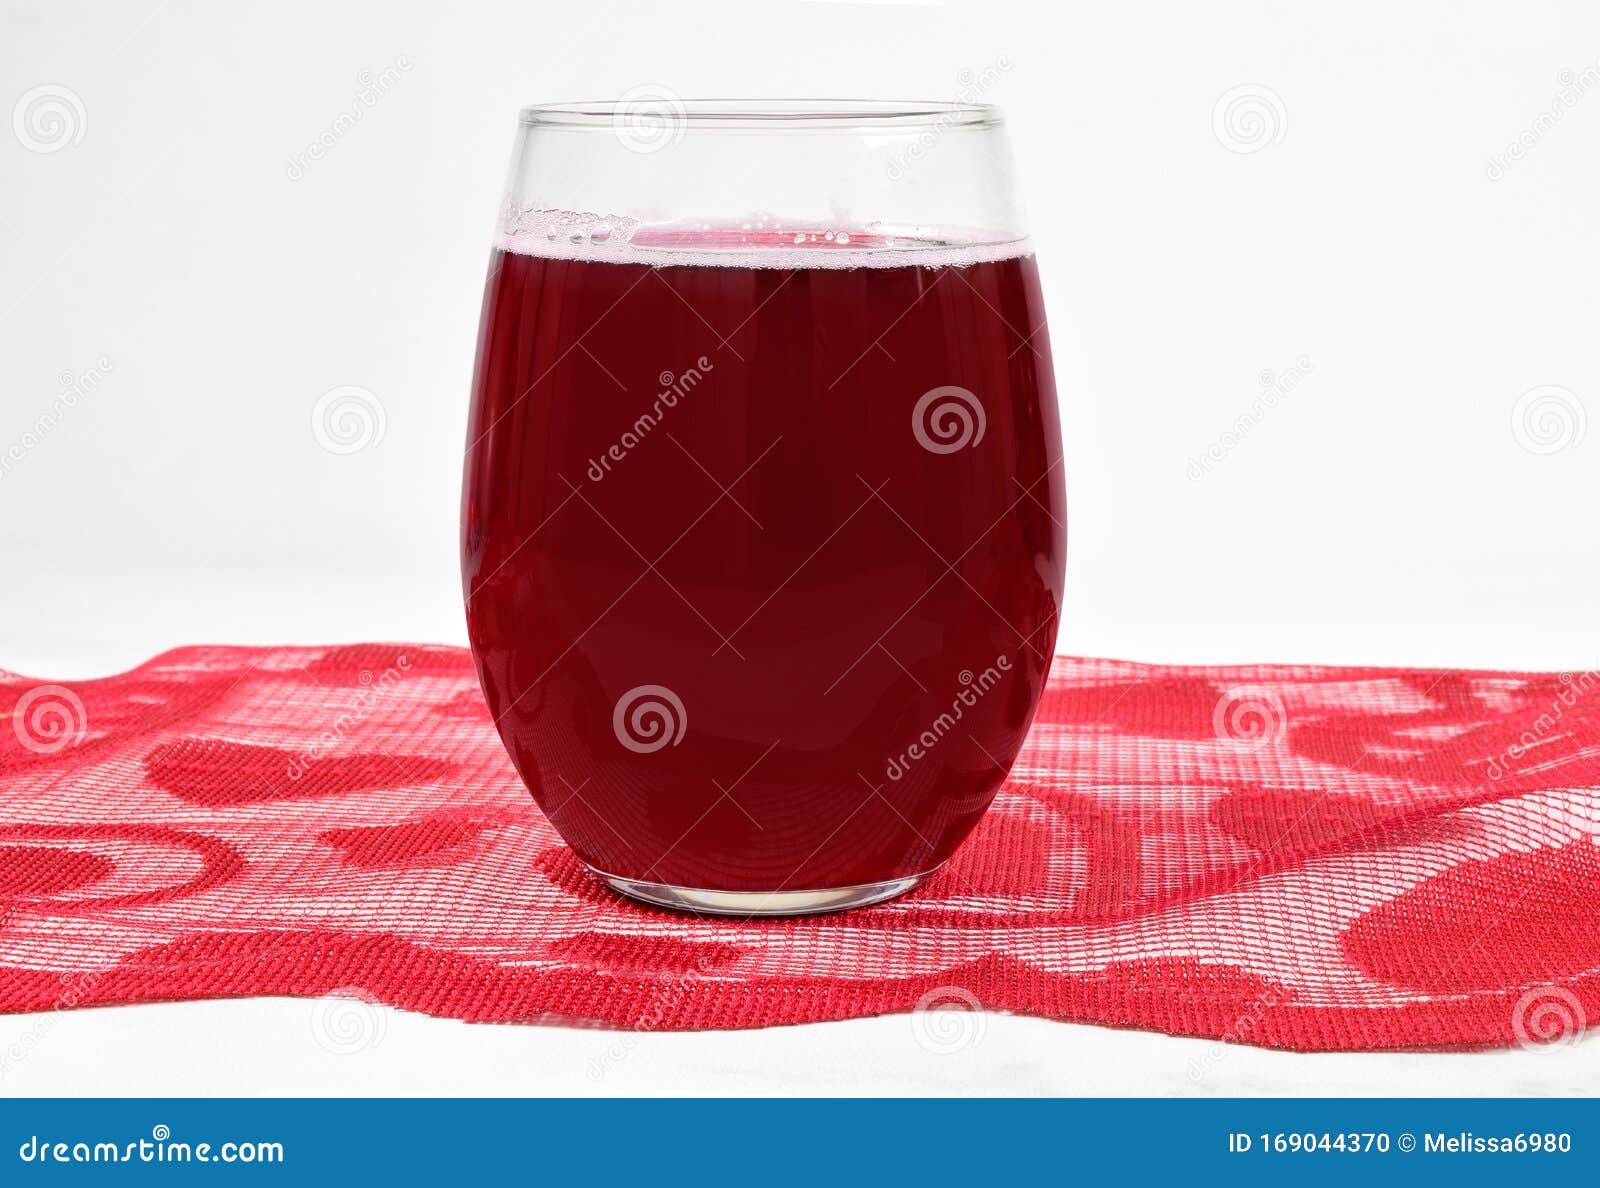 stemless wineglass valentine mockup with sparkling red wine